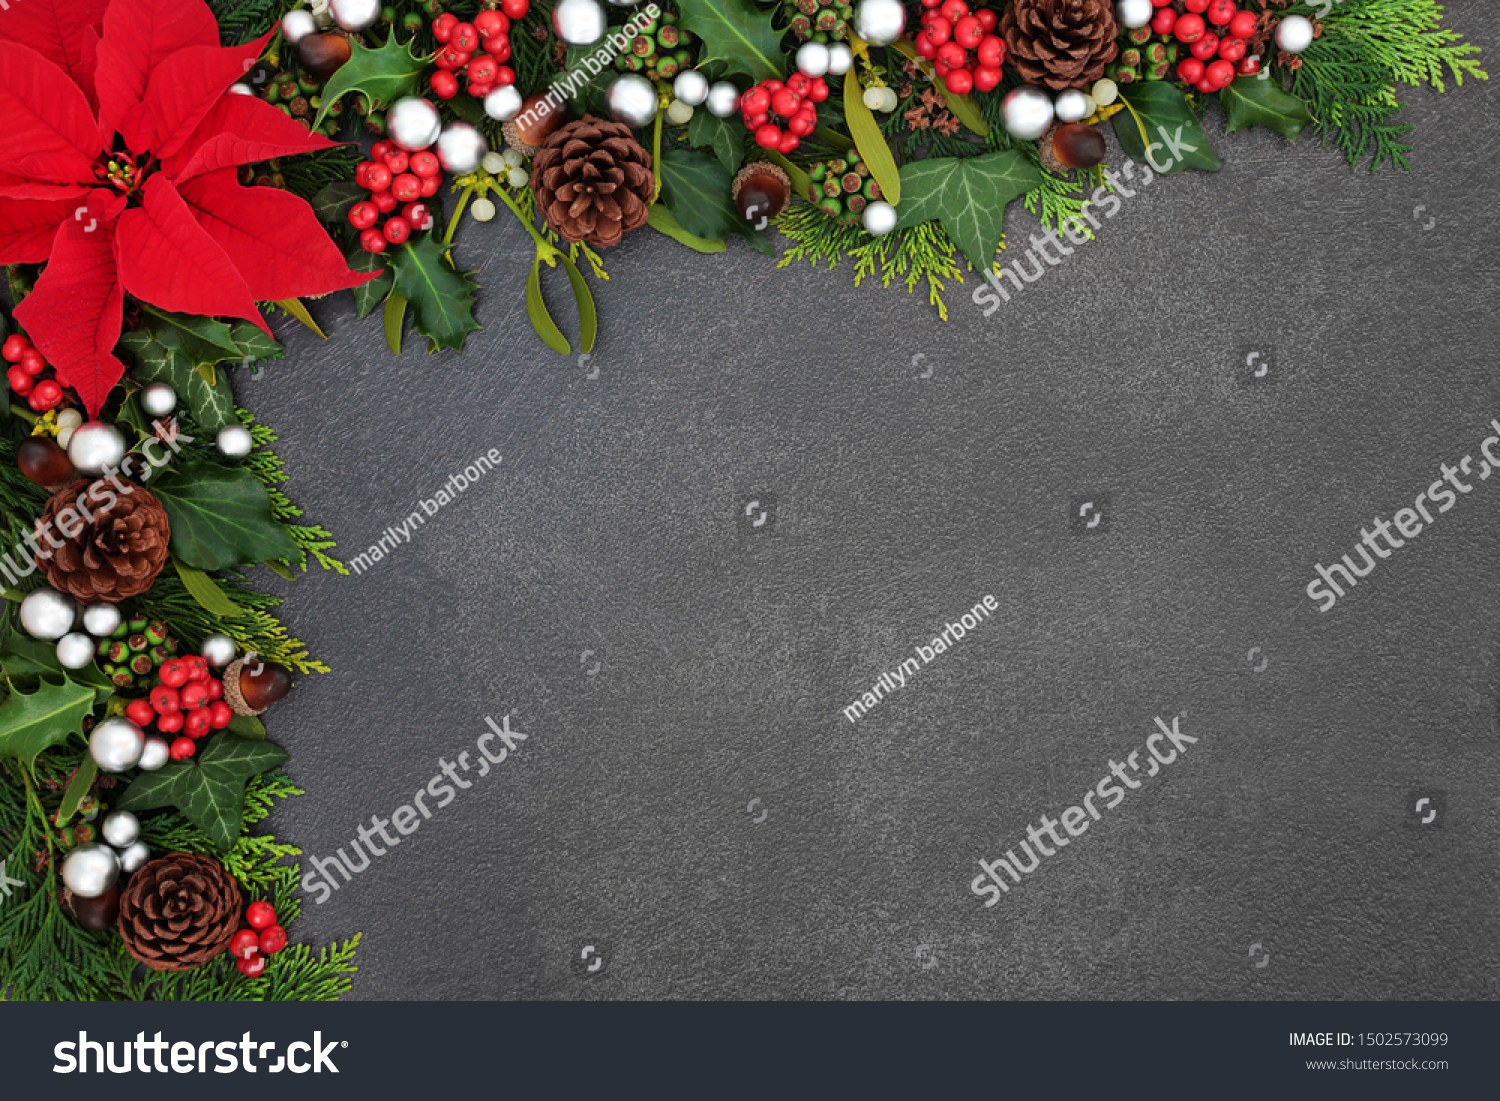 Poinsettia flower background border with silver ball baubles, holly, mistletoe and winter flora on grunge grey background with copy space. Traditional Thanksgiving or Christmas theme. #1502573099